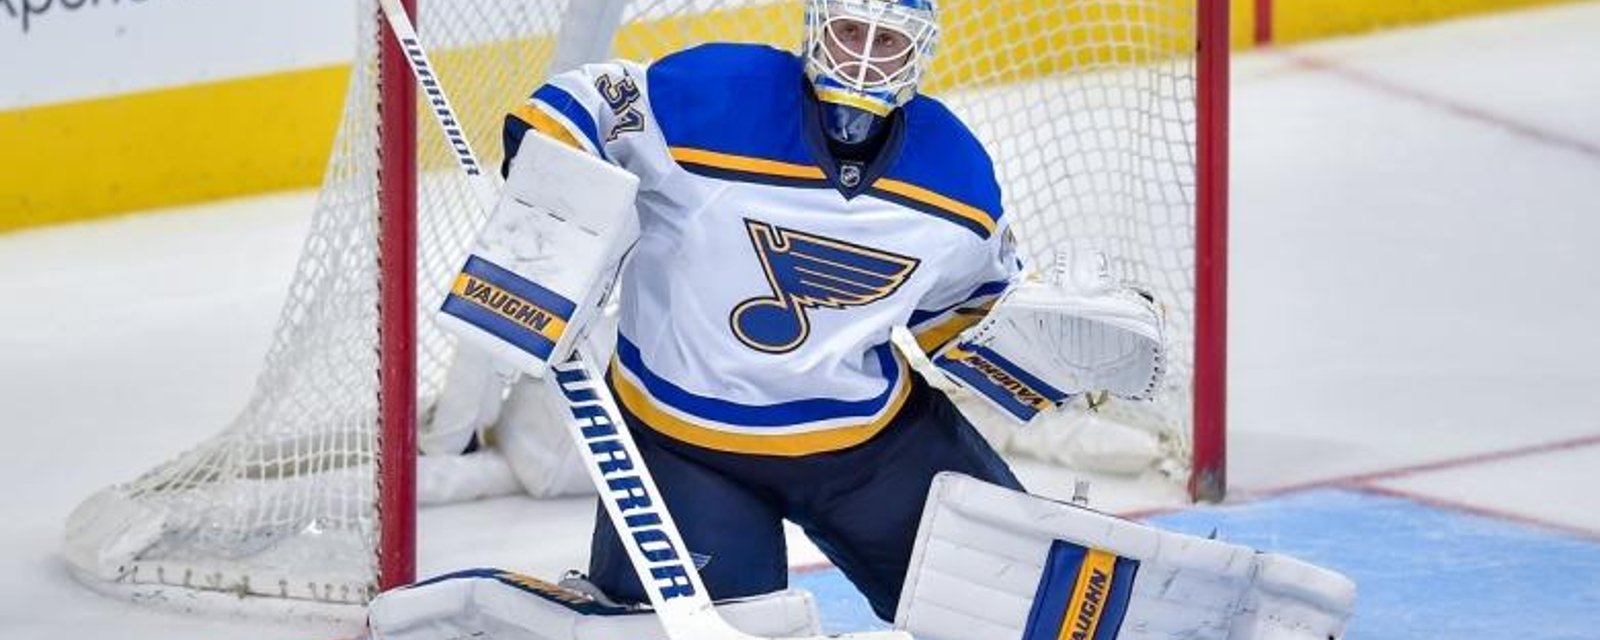 Two more playoff-bound goaltenders go down with injuries.